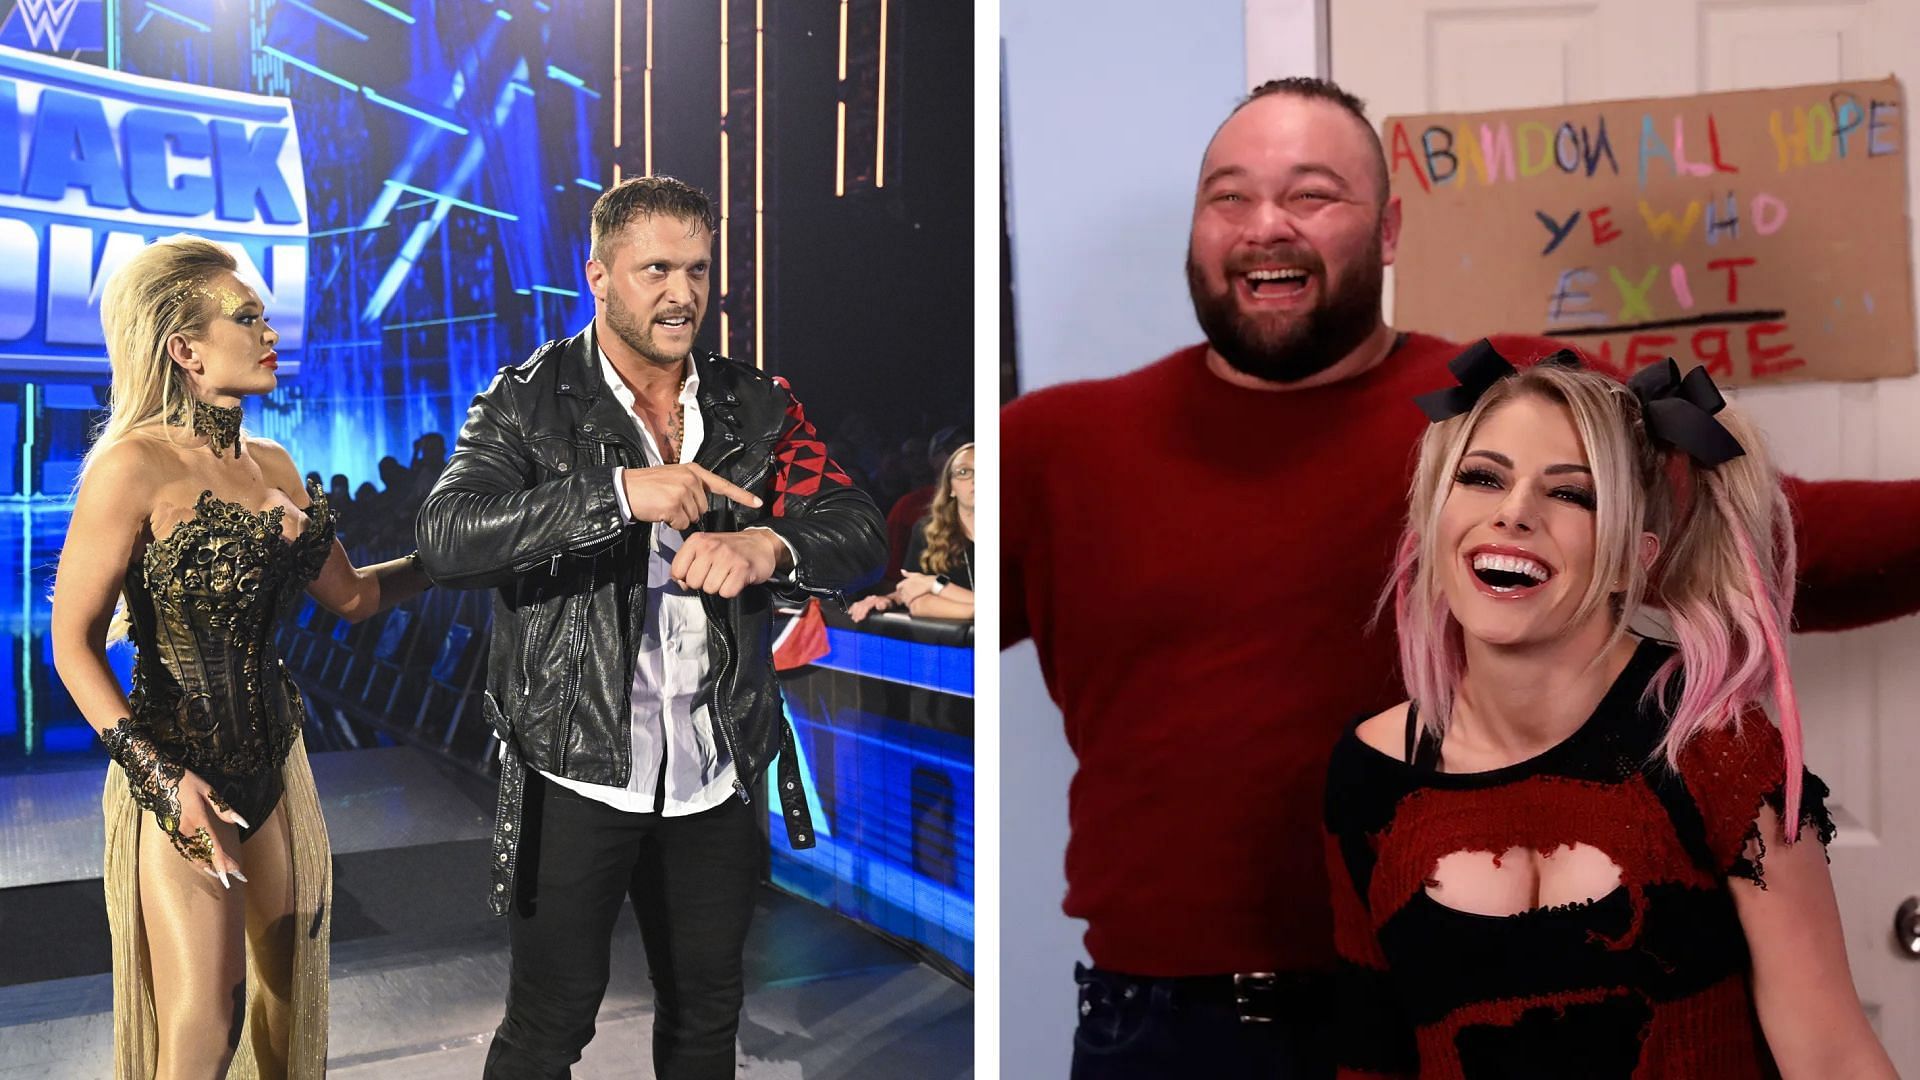 There are many potential opponents for Karrion Kross and Scarlett in WWE